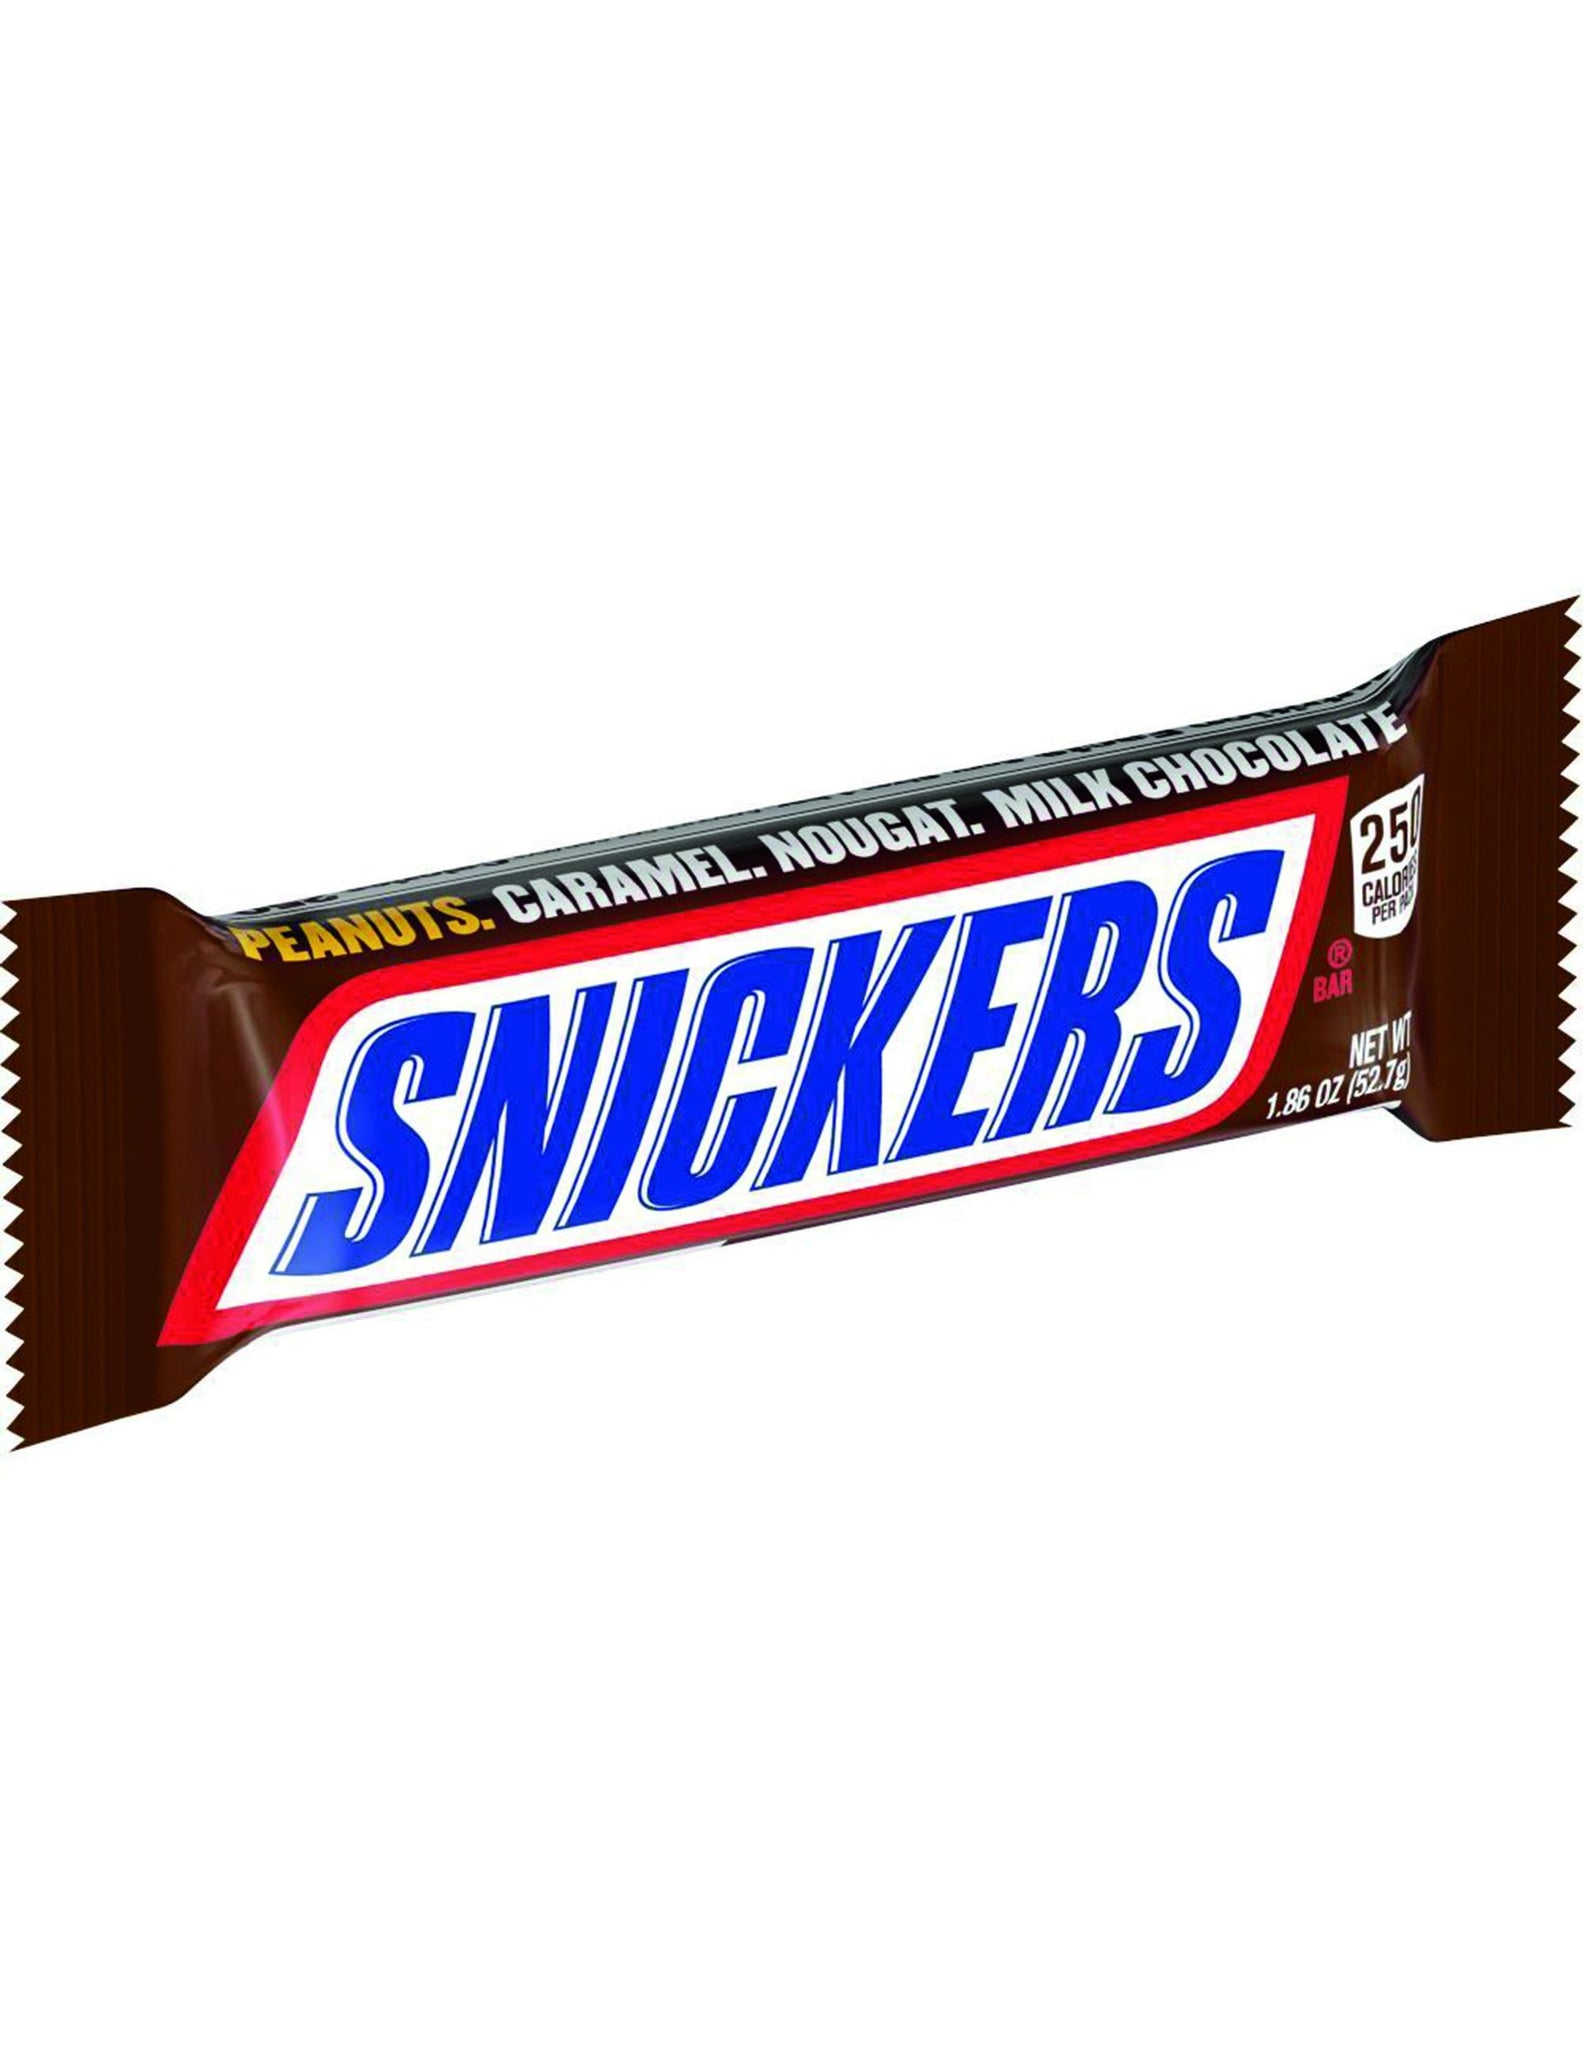 aba>Snickers, one